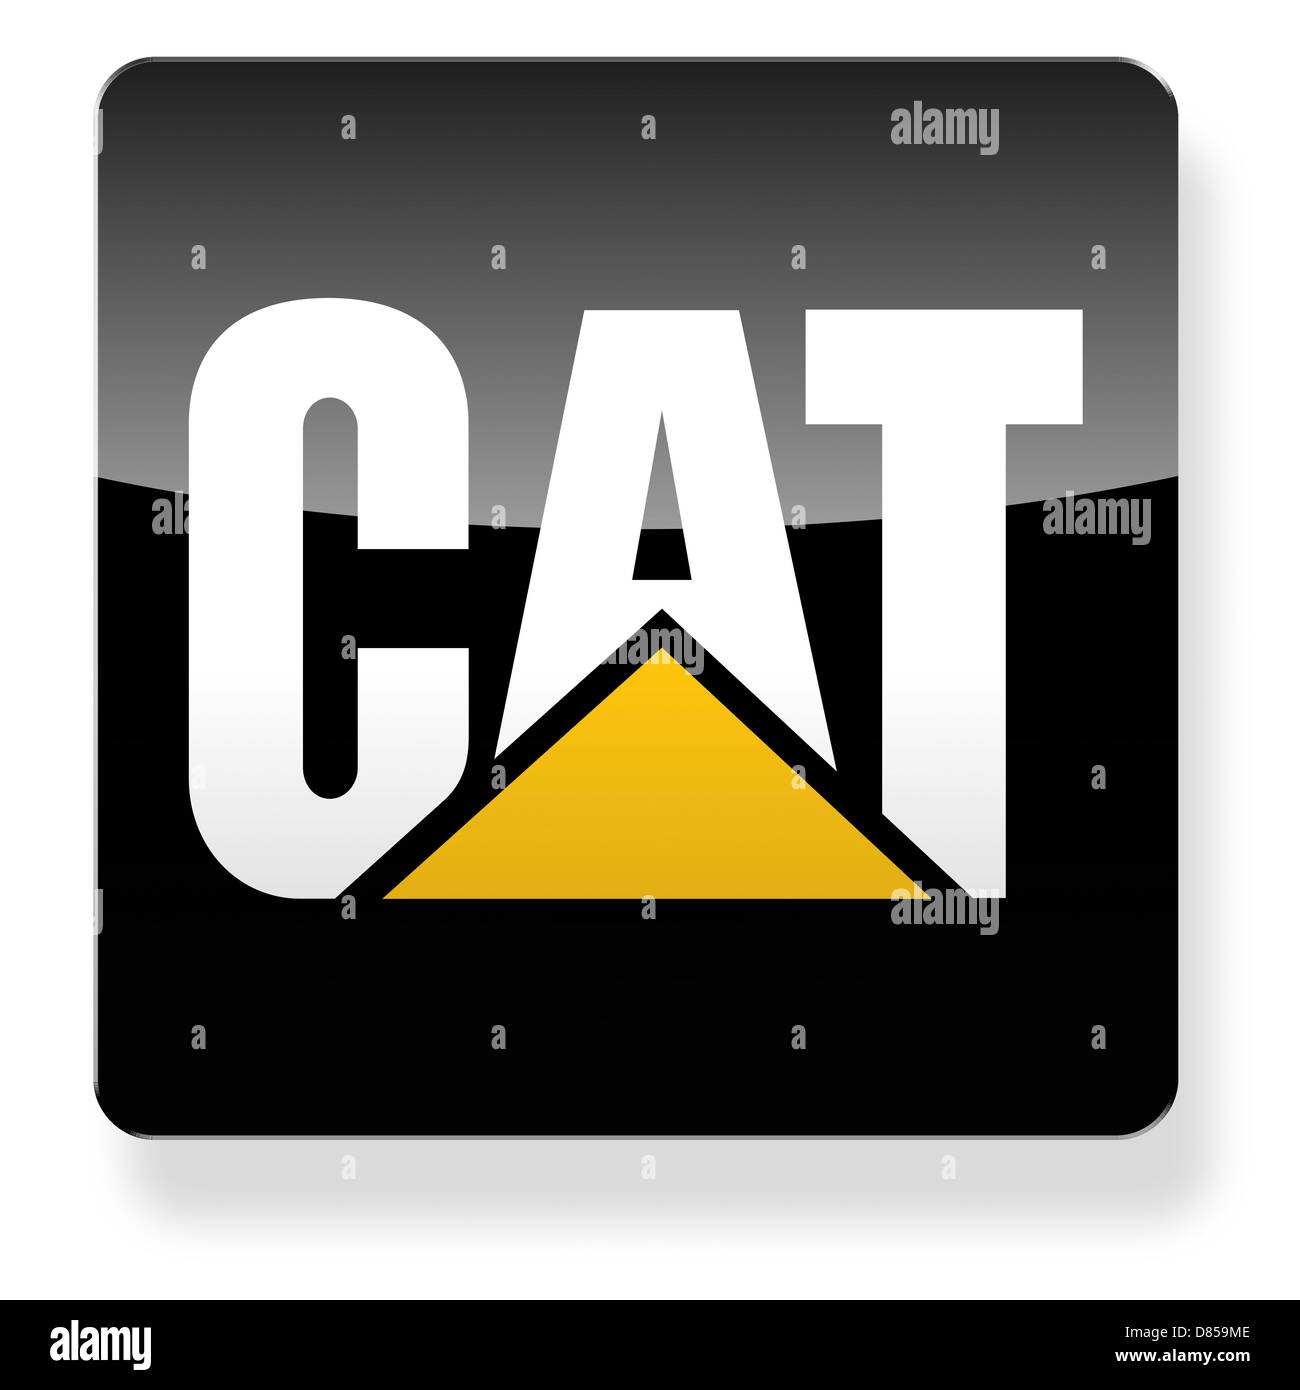 Caterpillar Inc. logo as an app icon. Clipping path included. Stock Photo